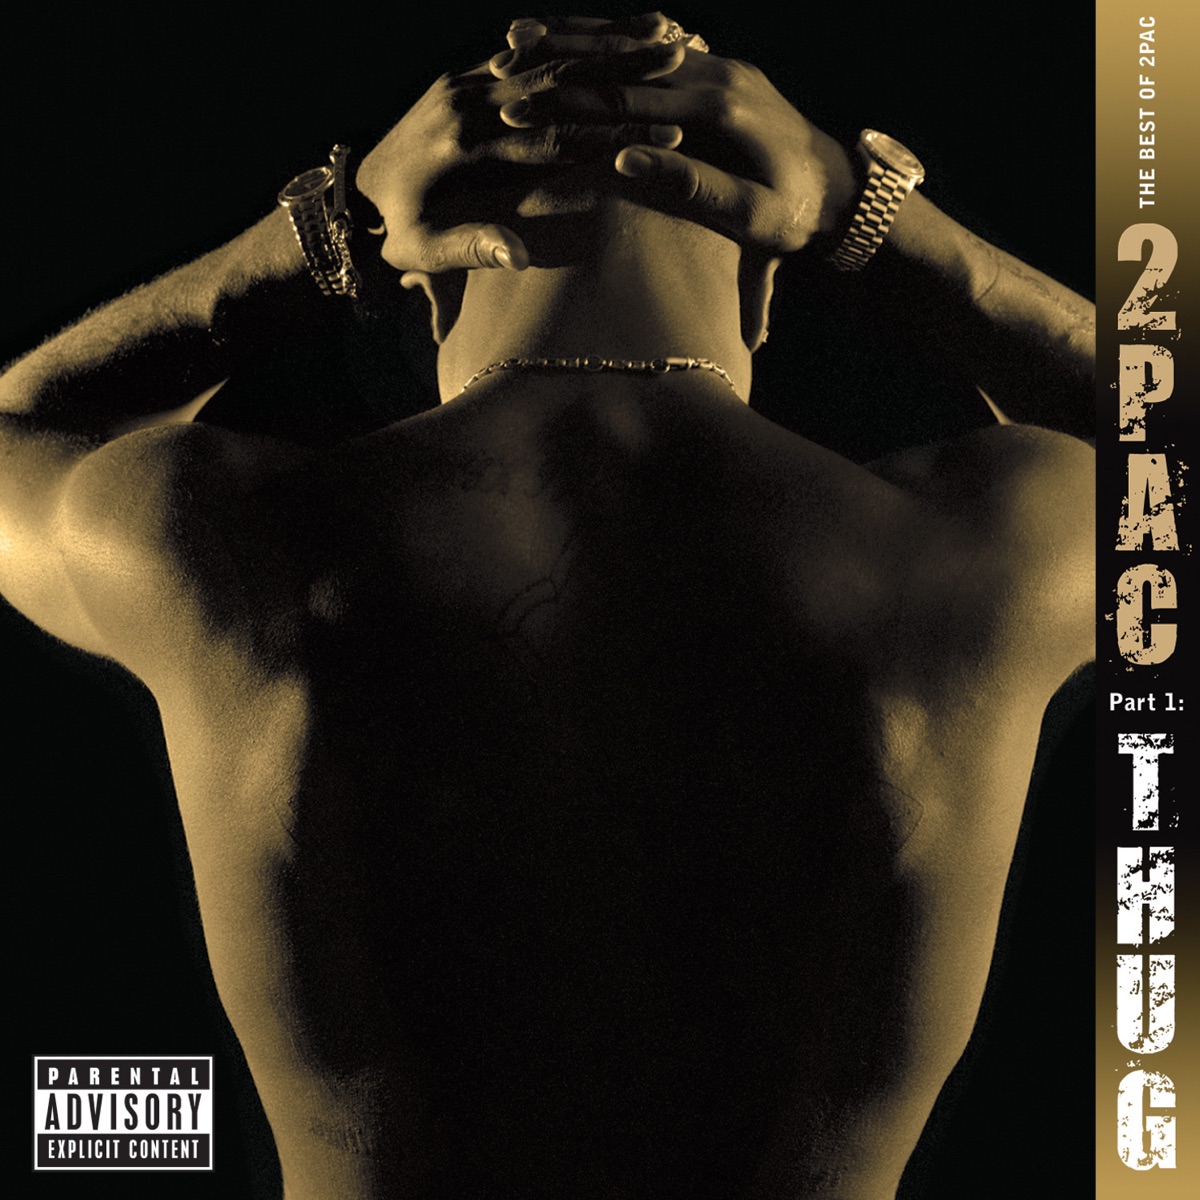 The Best of 2Pac, Pt. 1: Thug - Album by 2Pac - Apple Music